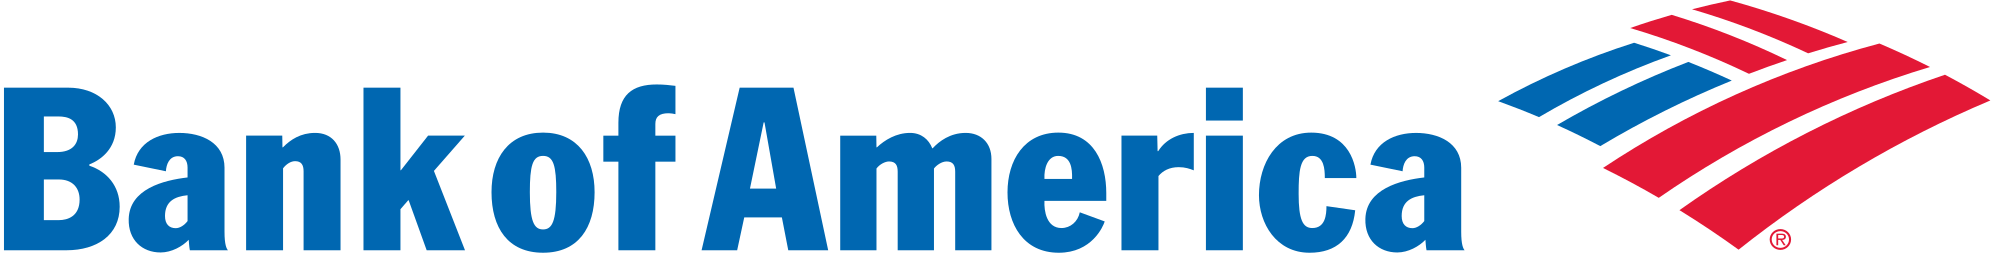 2000px-Bank_of_America_logo.svg.png